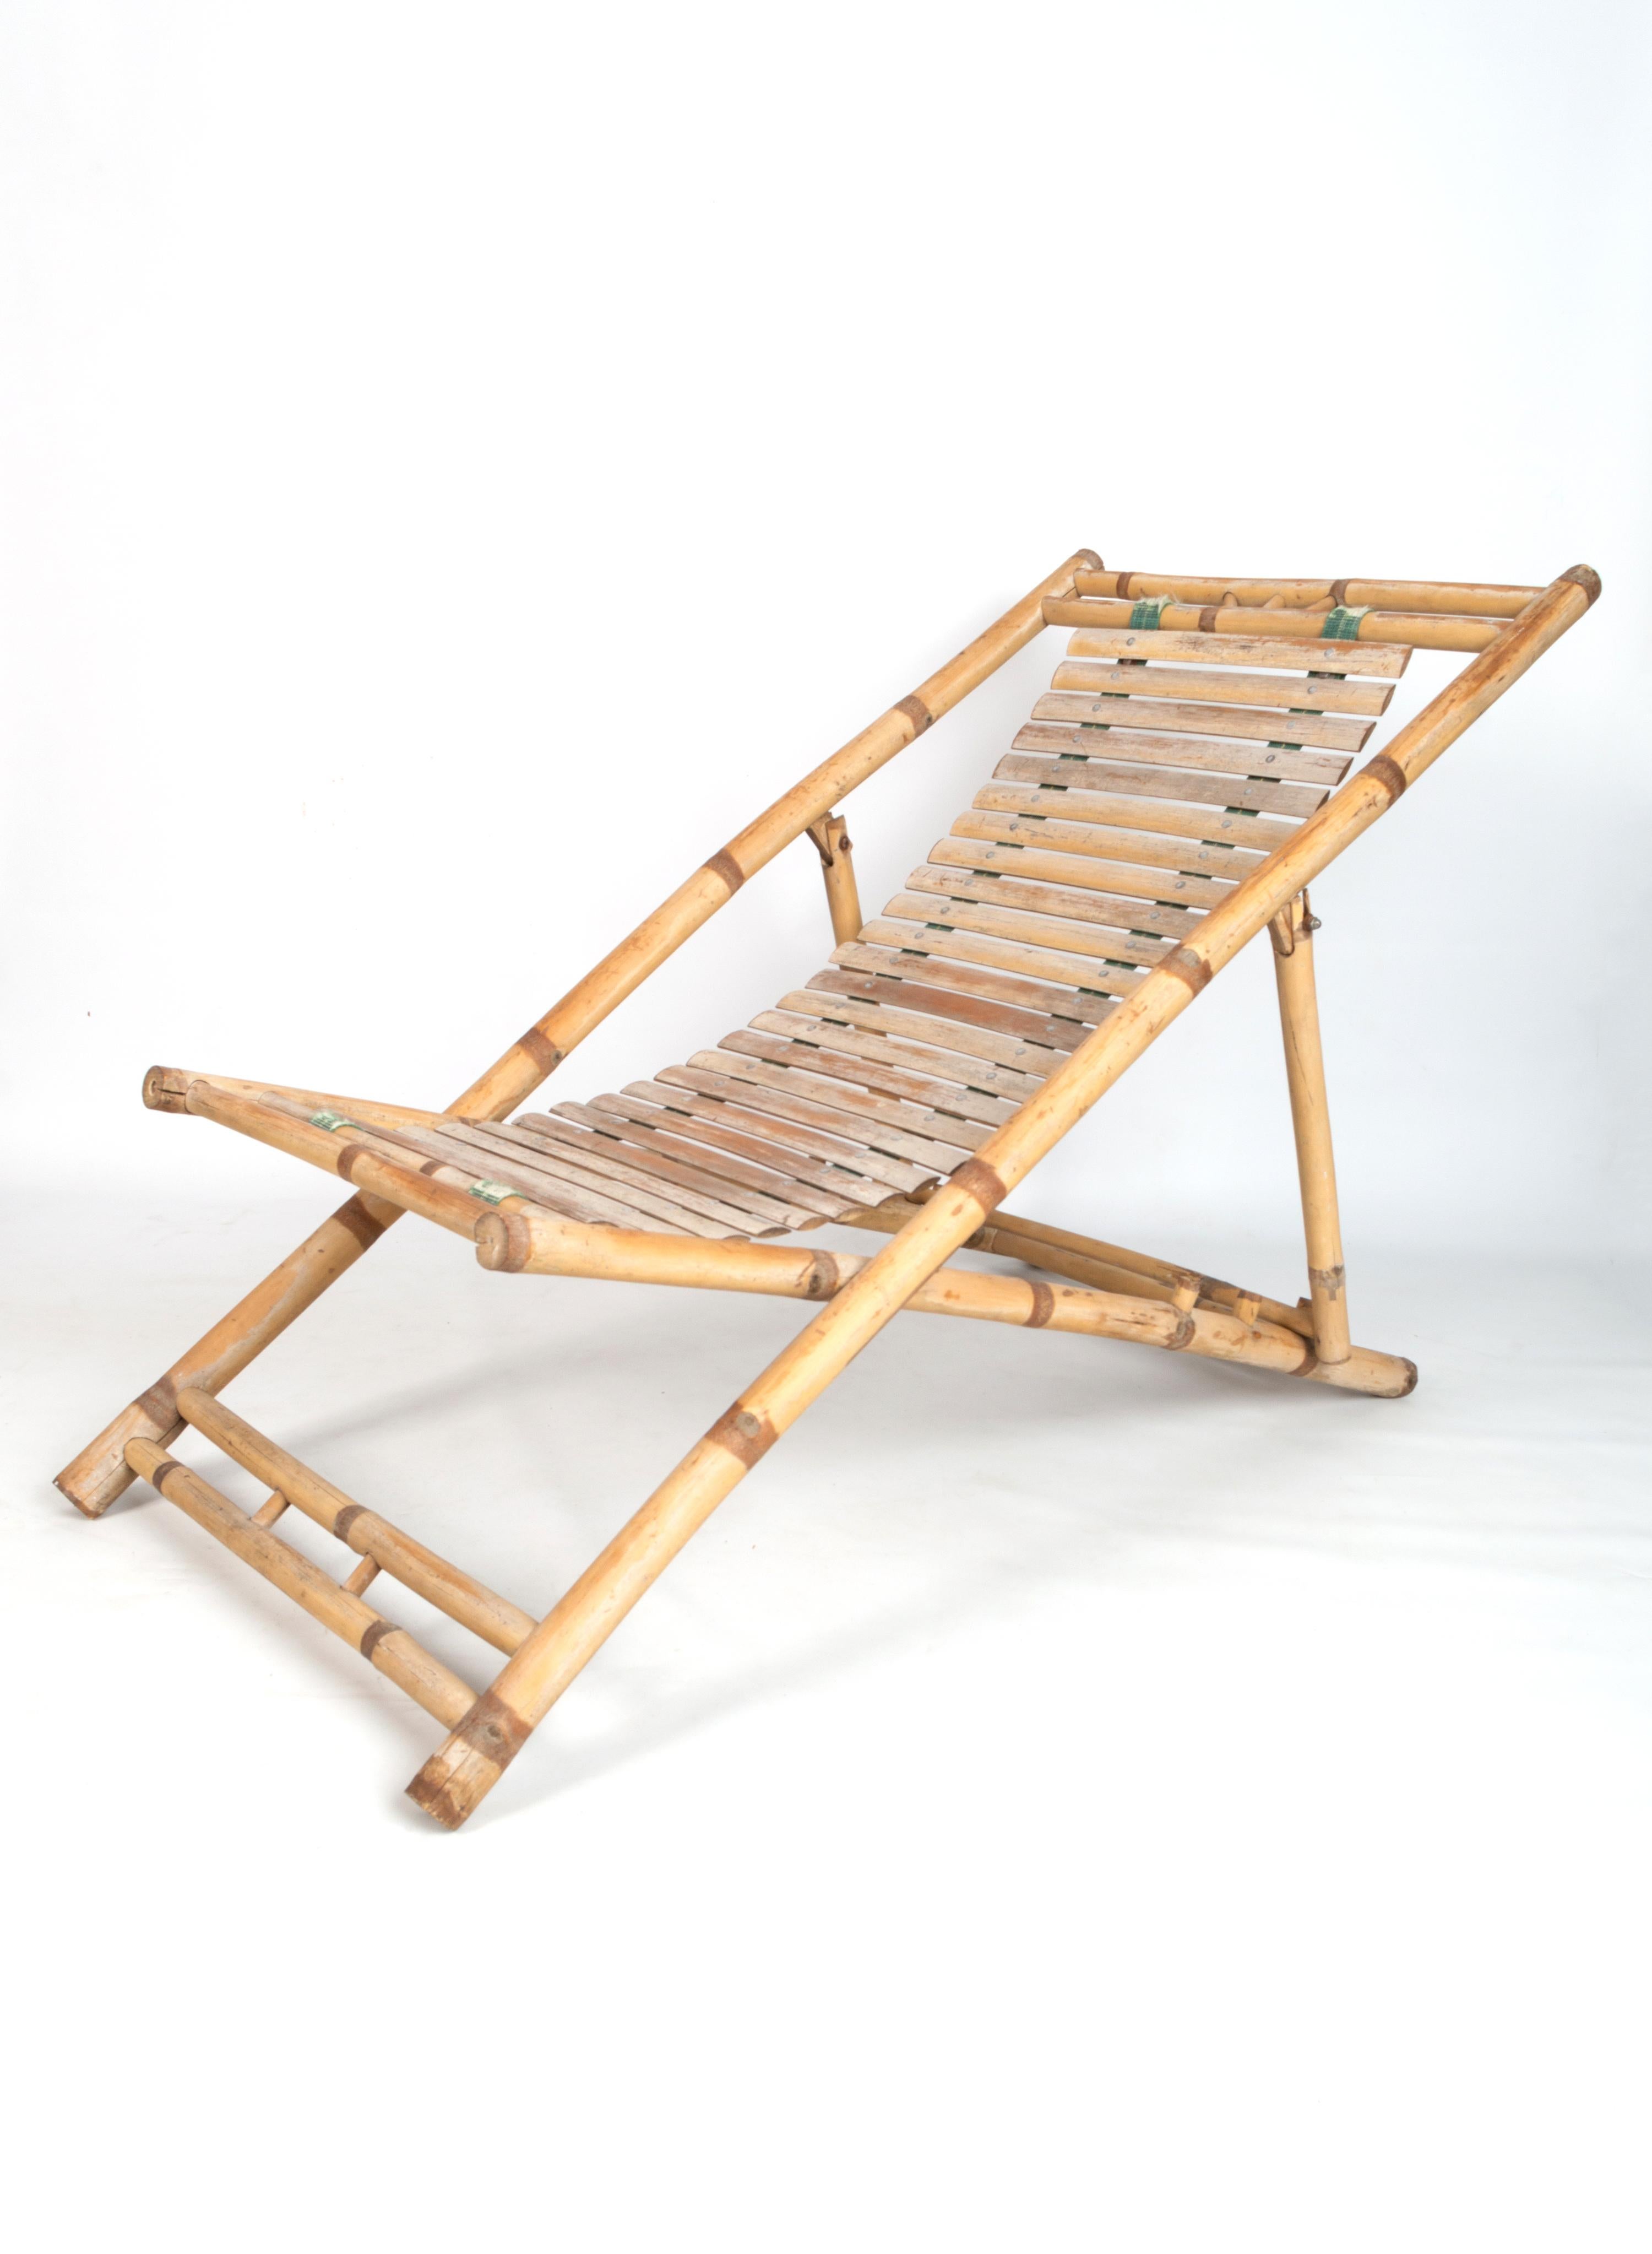 20th Century Pair of Bamboo Deck Chairs Sun Loungers C.1980, Italy For Sale